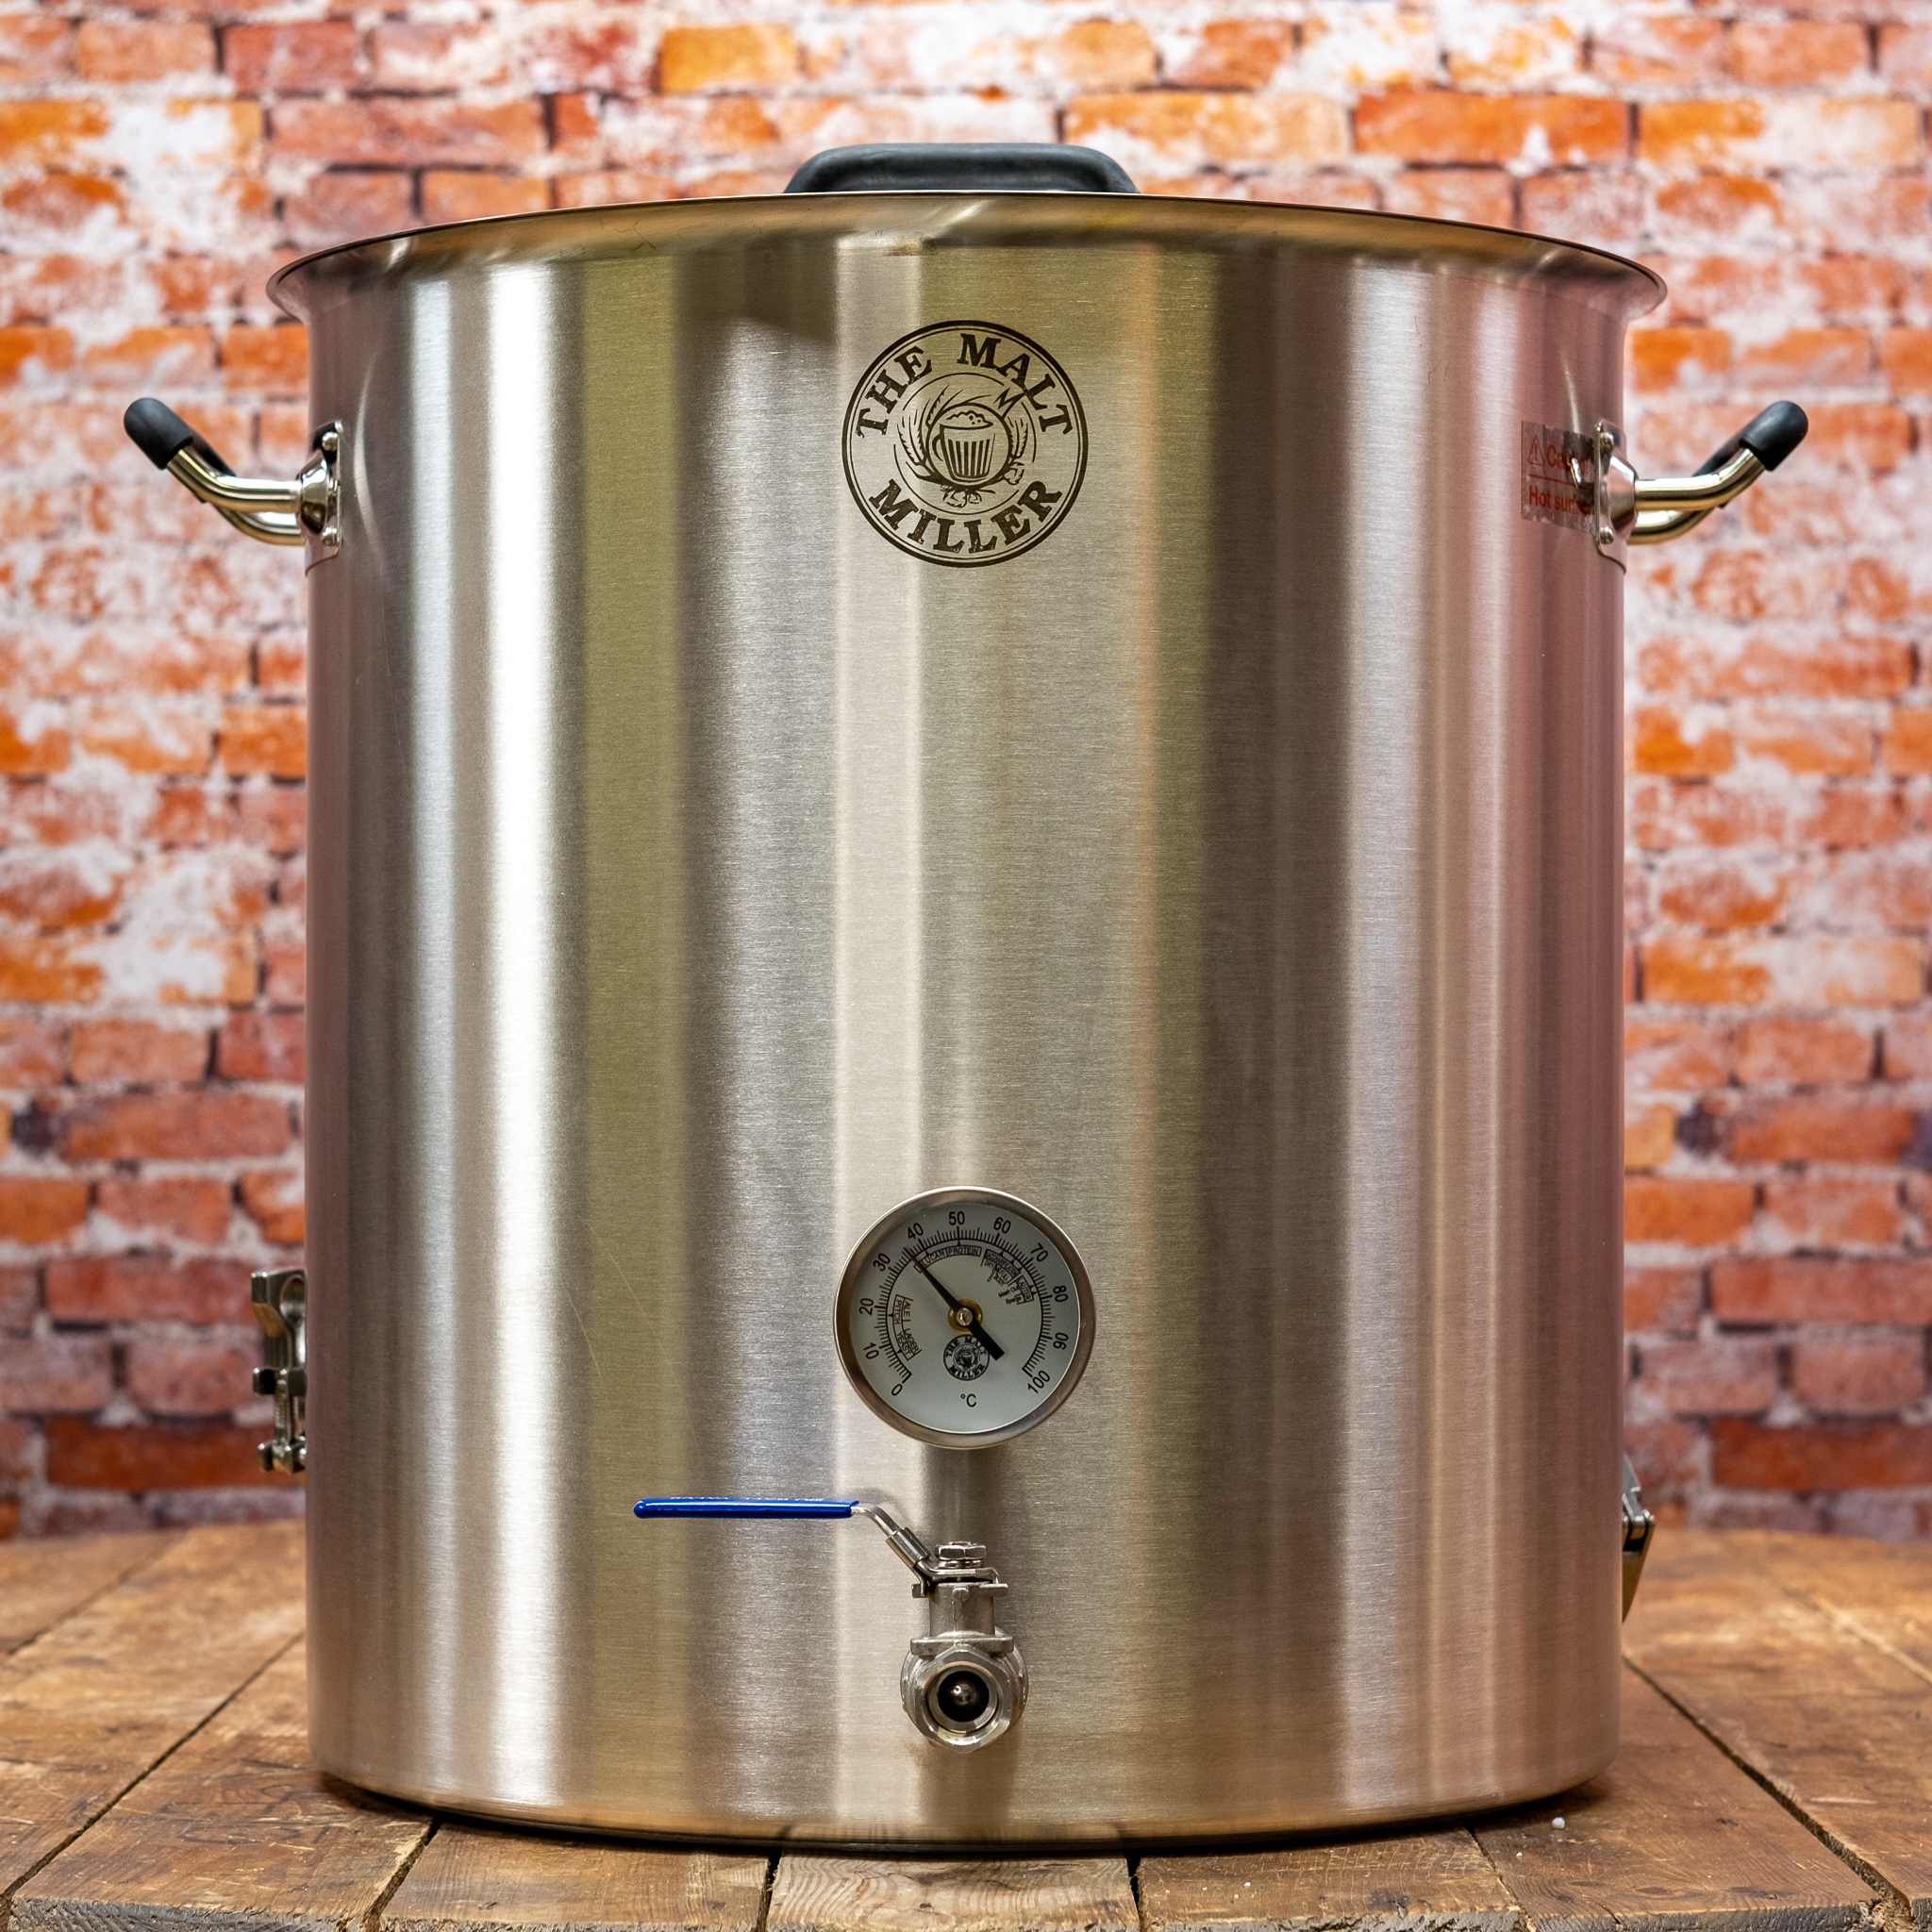 Stainless Steel Beer Brewing Kettle - 2 Gal | Craft a Brew